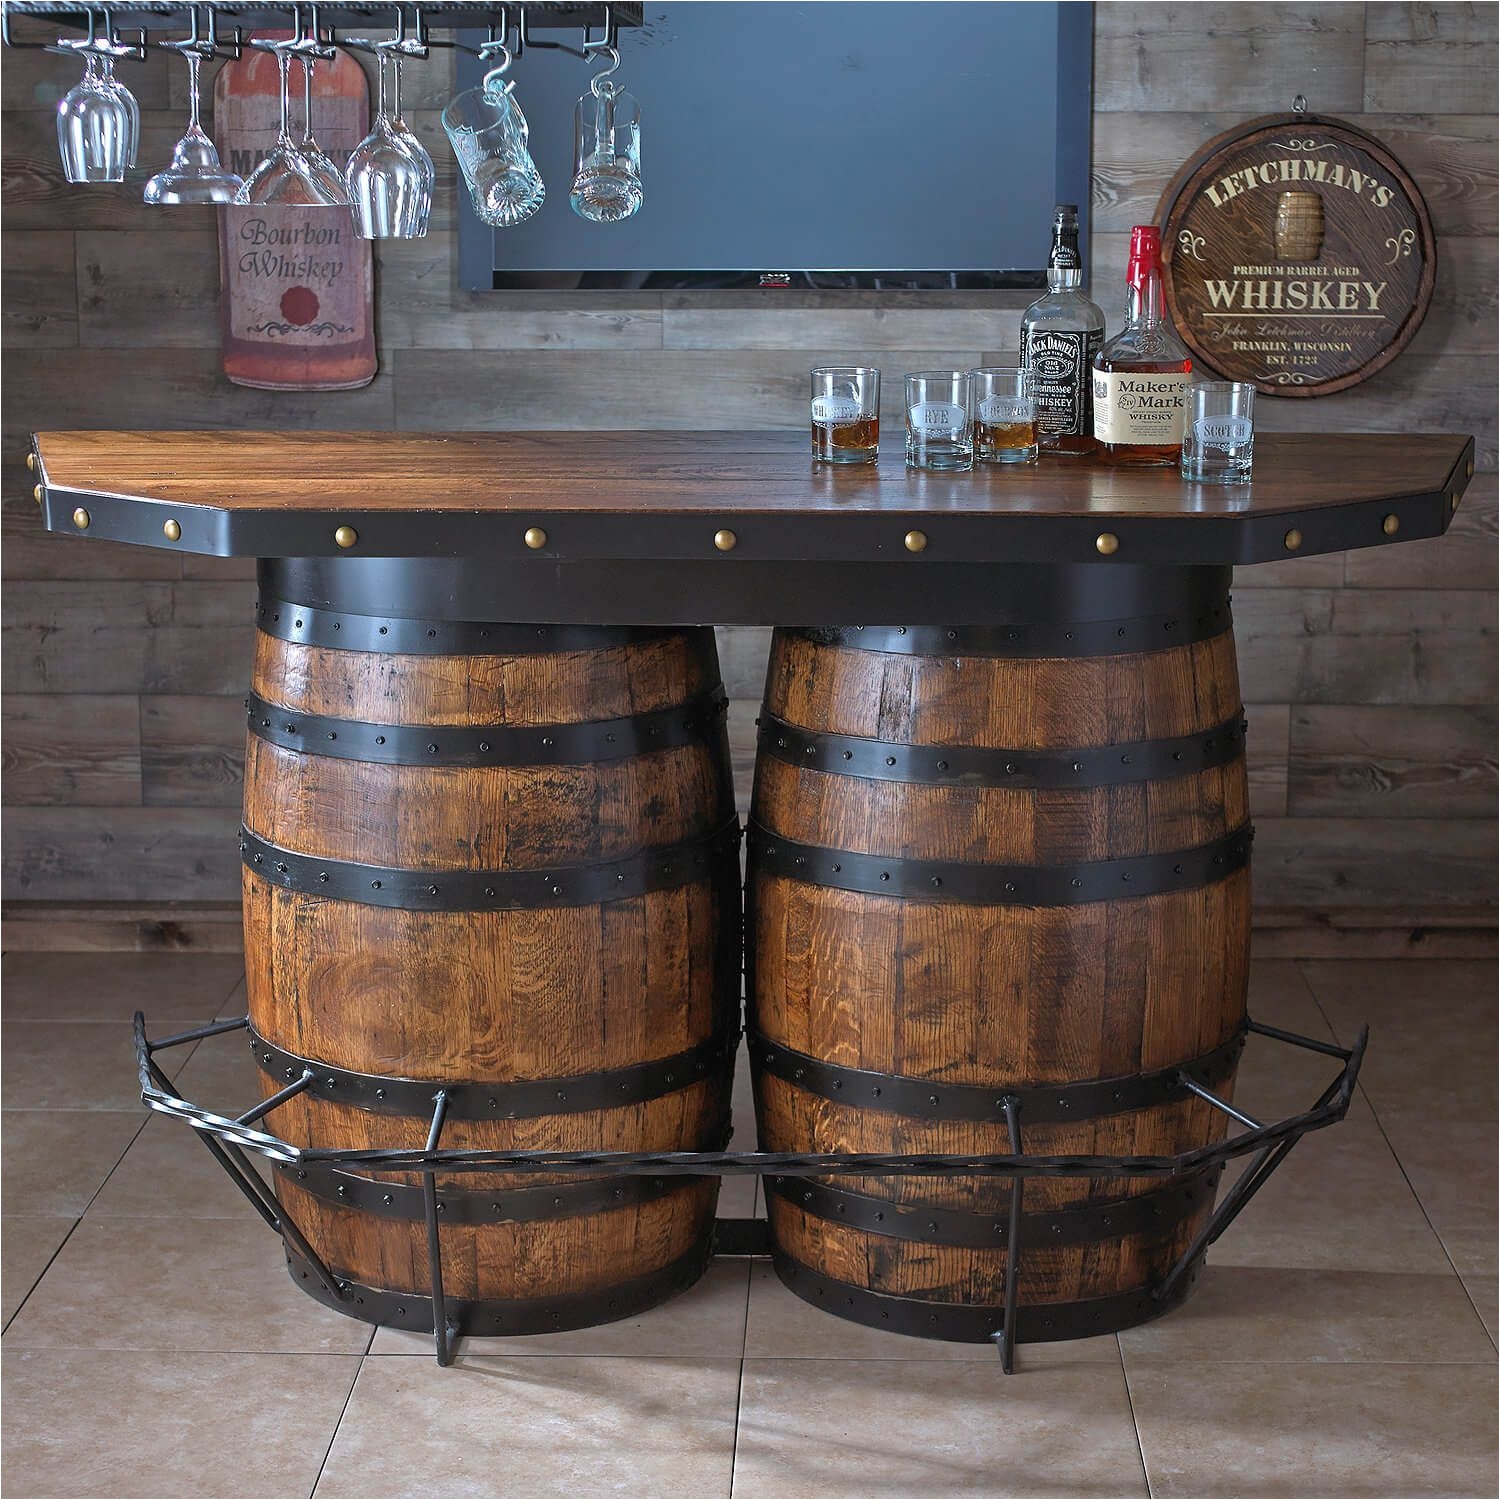 38 creative ideas for reusing old wine barrels